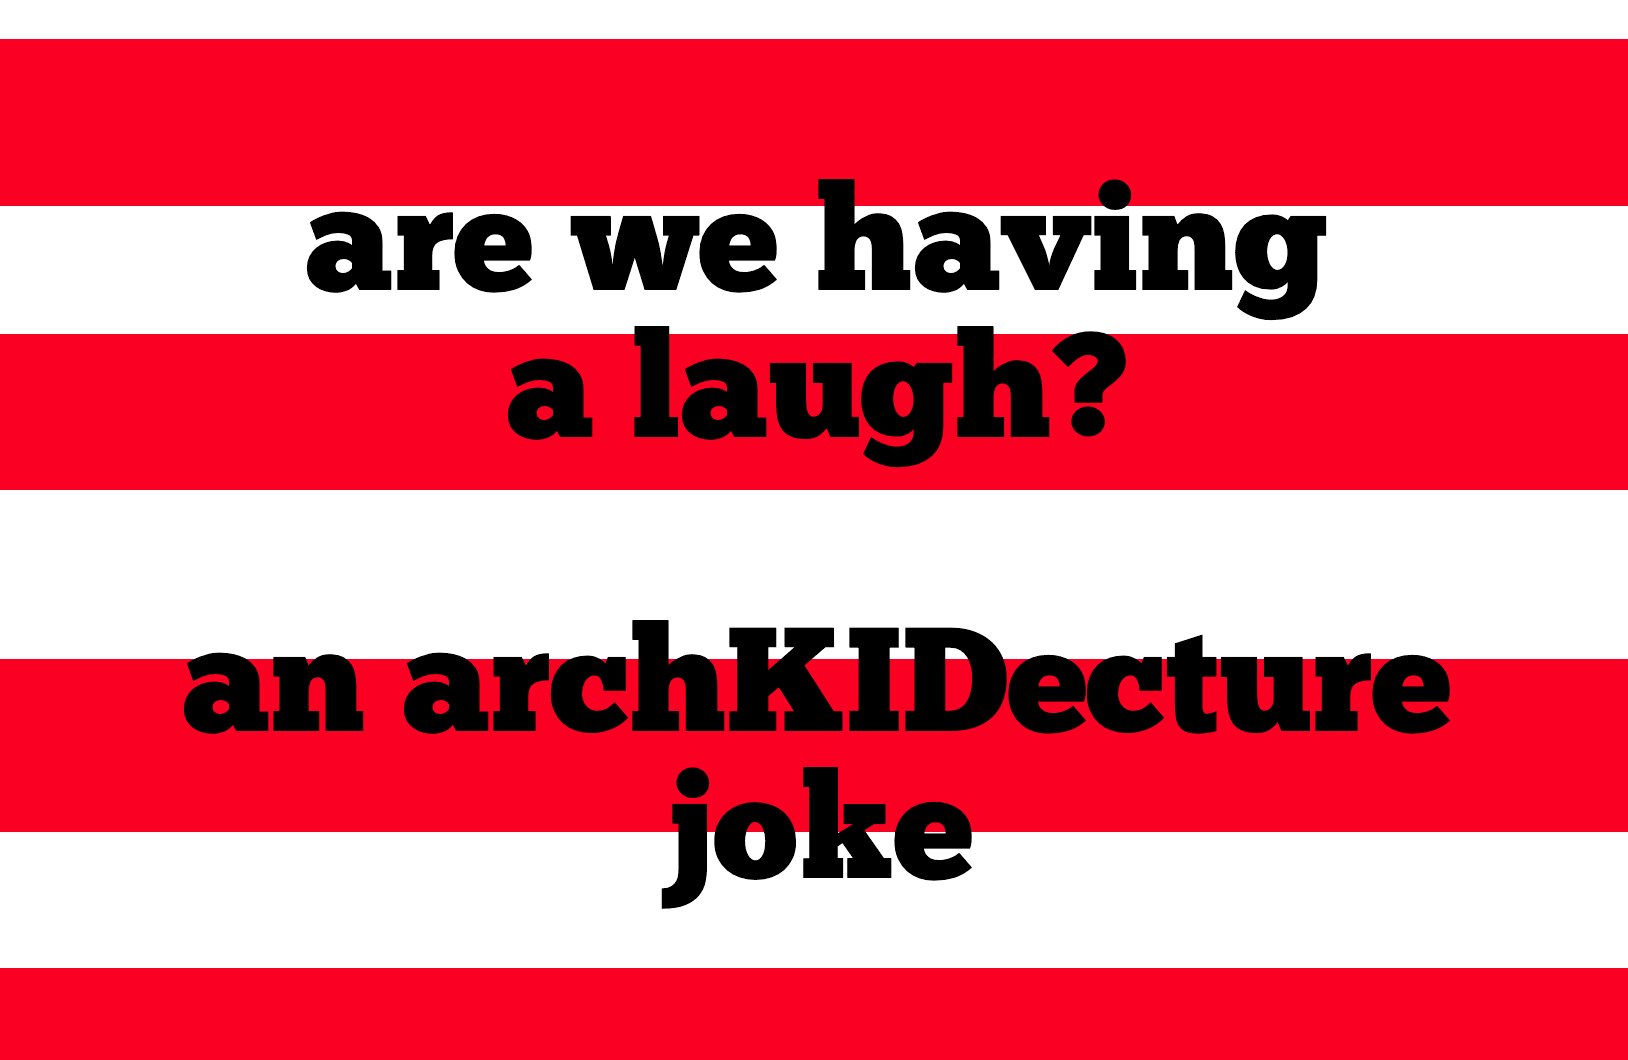 are we having a laugh? an archKIDecture joke with red and white stripes in background